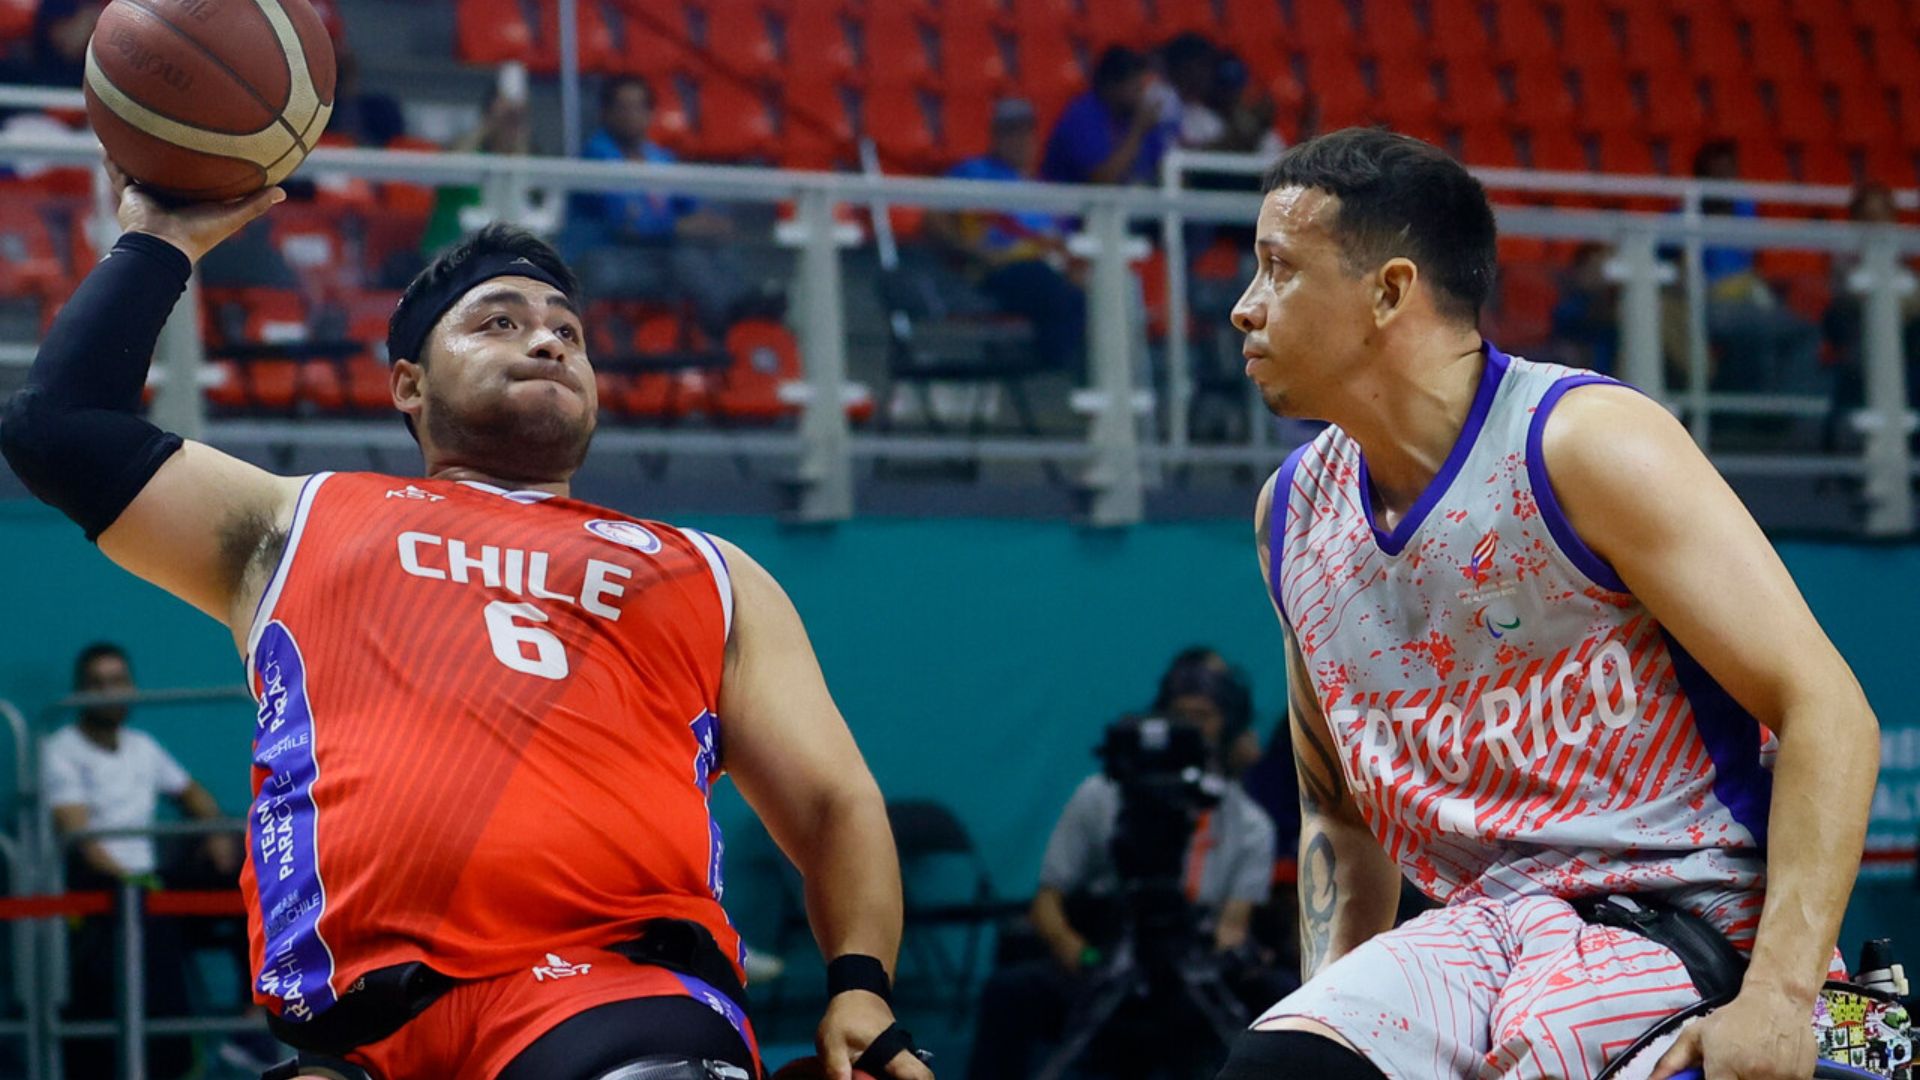 Chile Suffered Its Fifth Defeat and Finished Last in Wheelchair Basketball